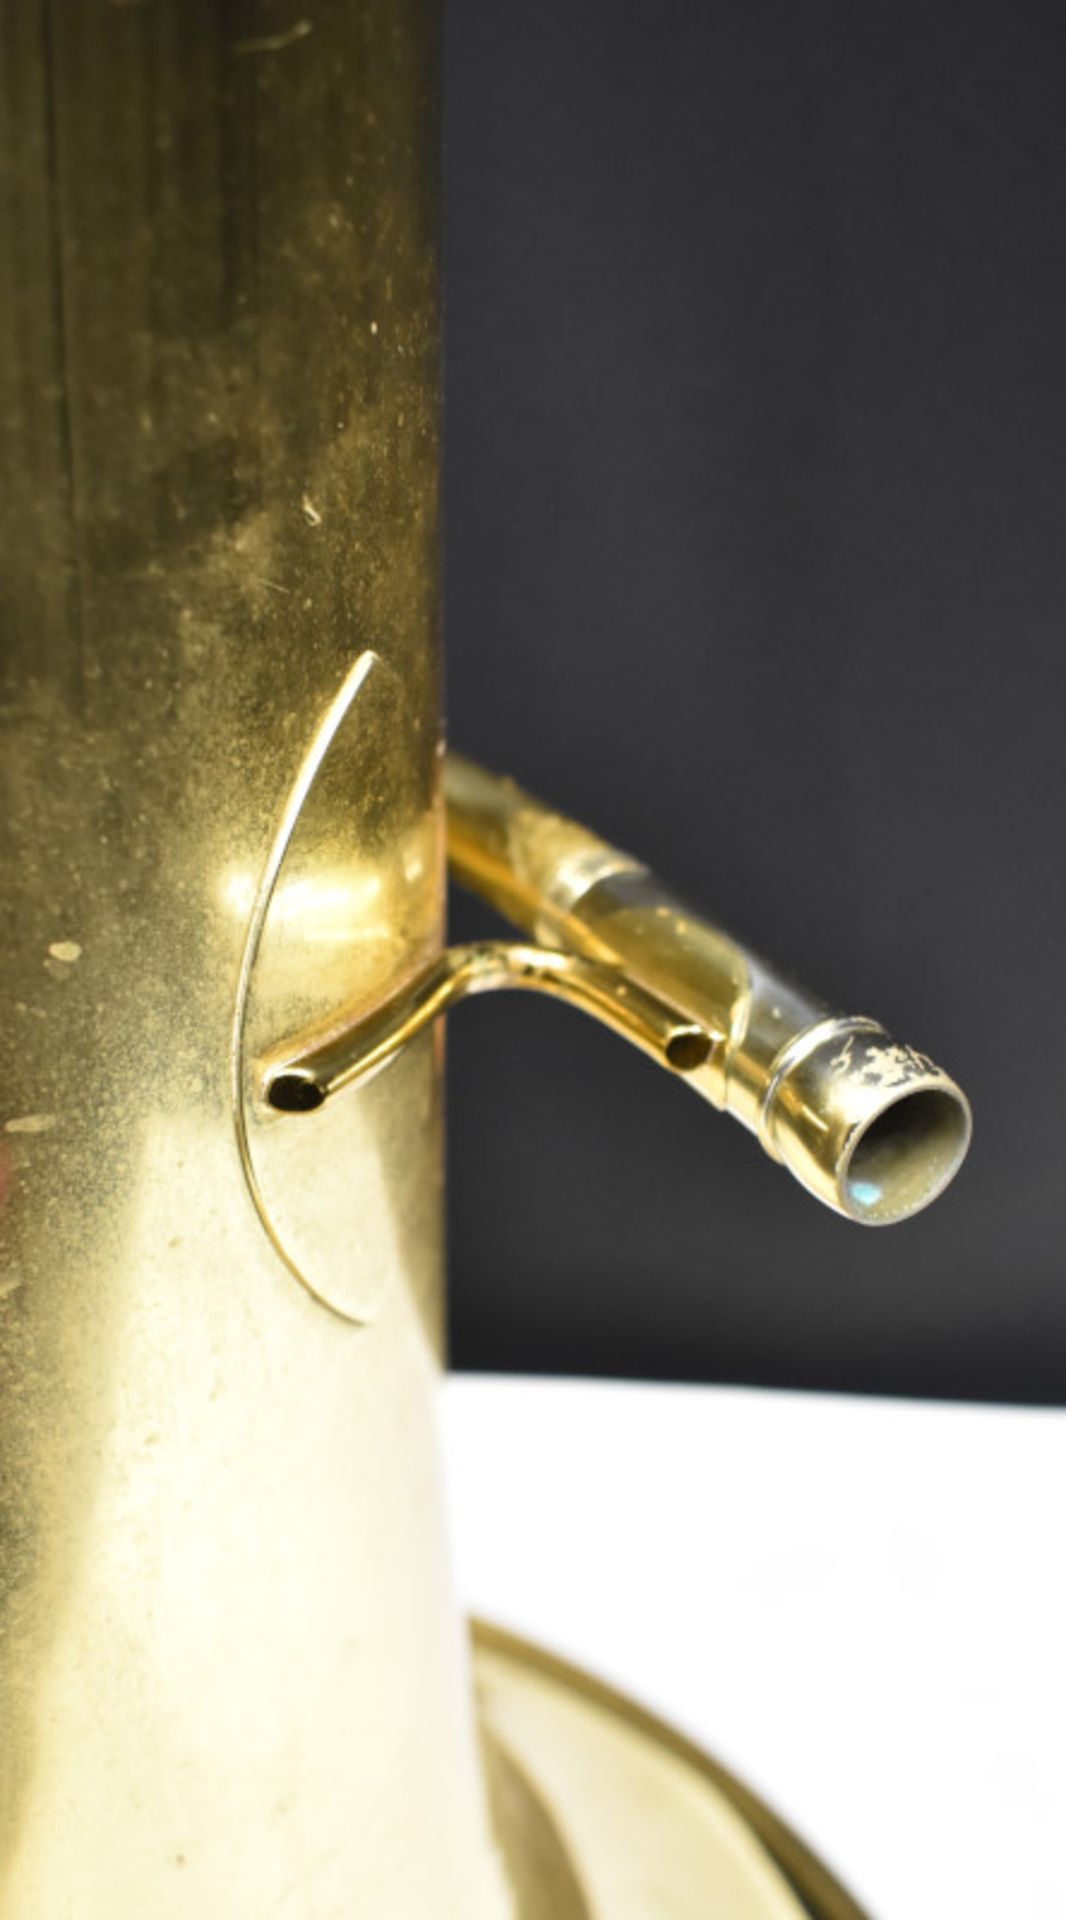 Besson Sovereign BE994 Tuba in Besson Case (case damaged no wheels) - Serial No. 883092 - - Image 12 of 21